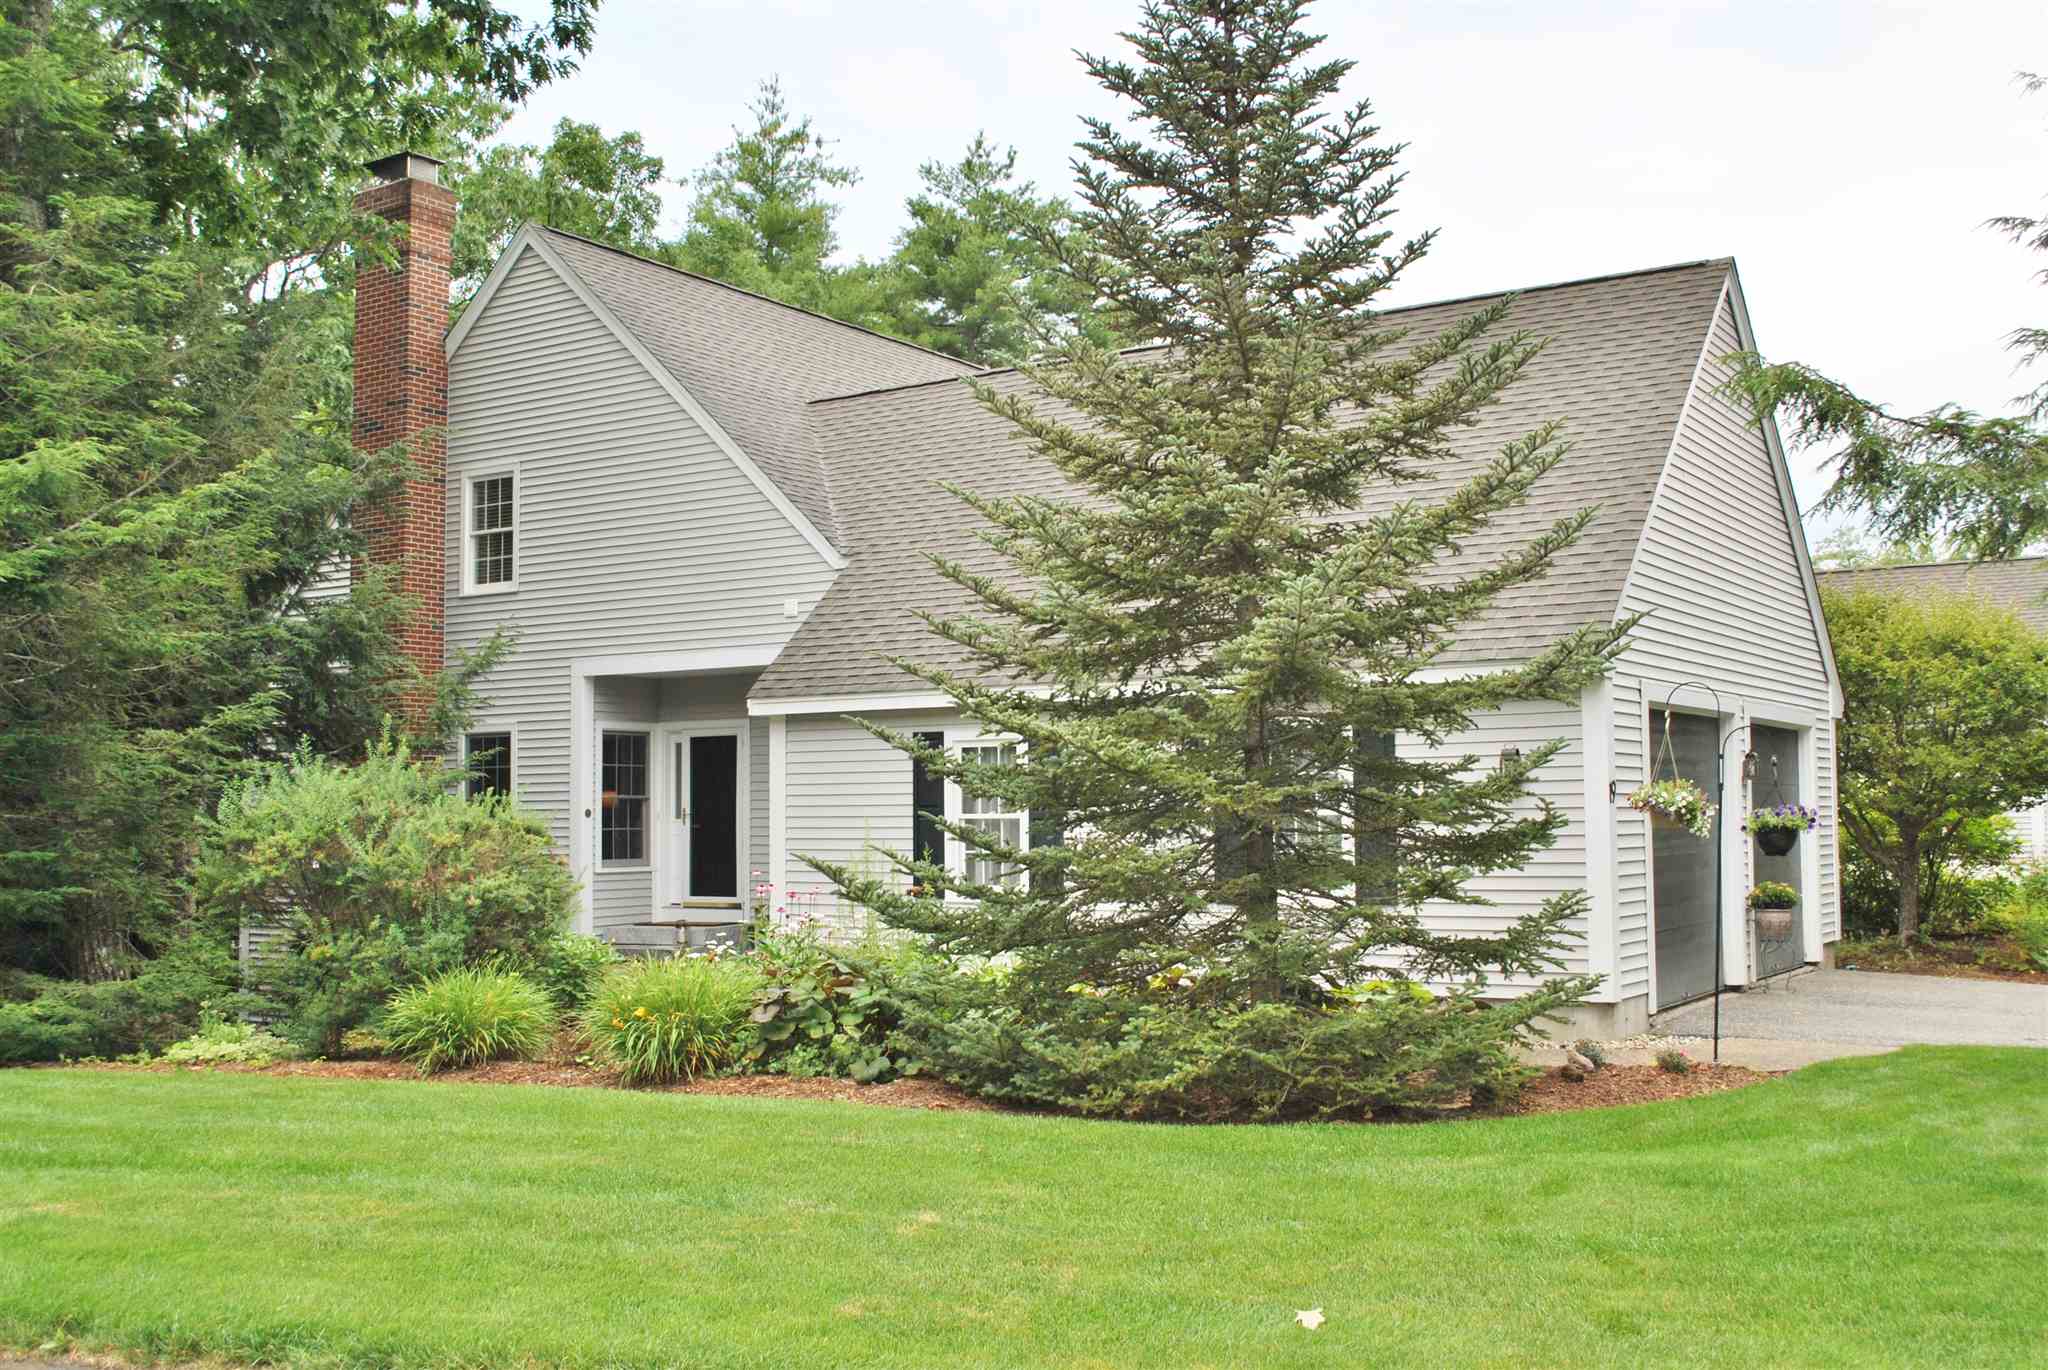 19 Gowing Lane, Amherst, NH 03031